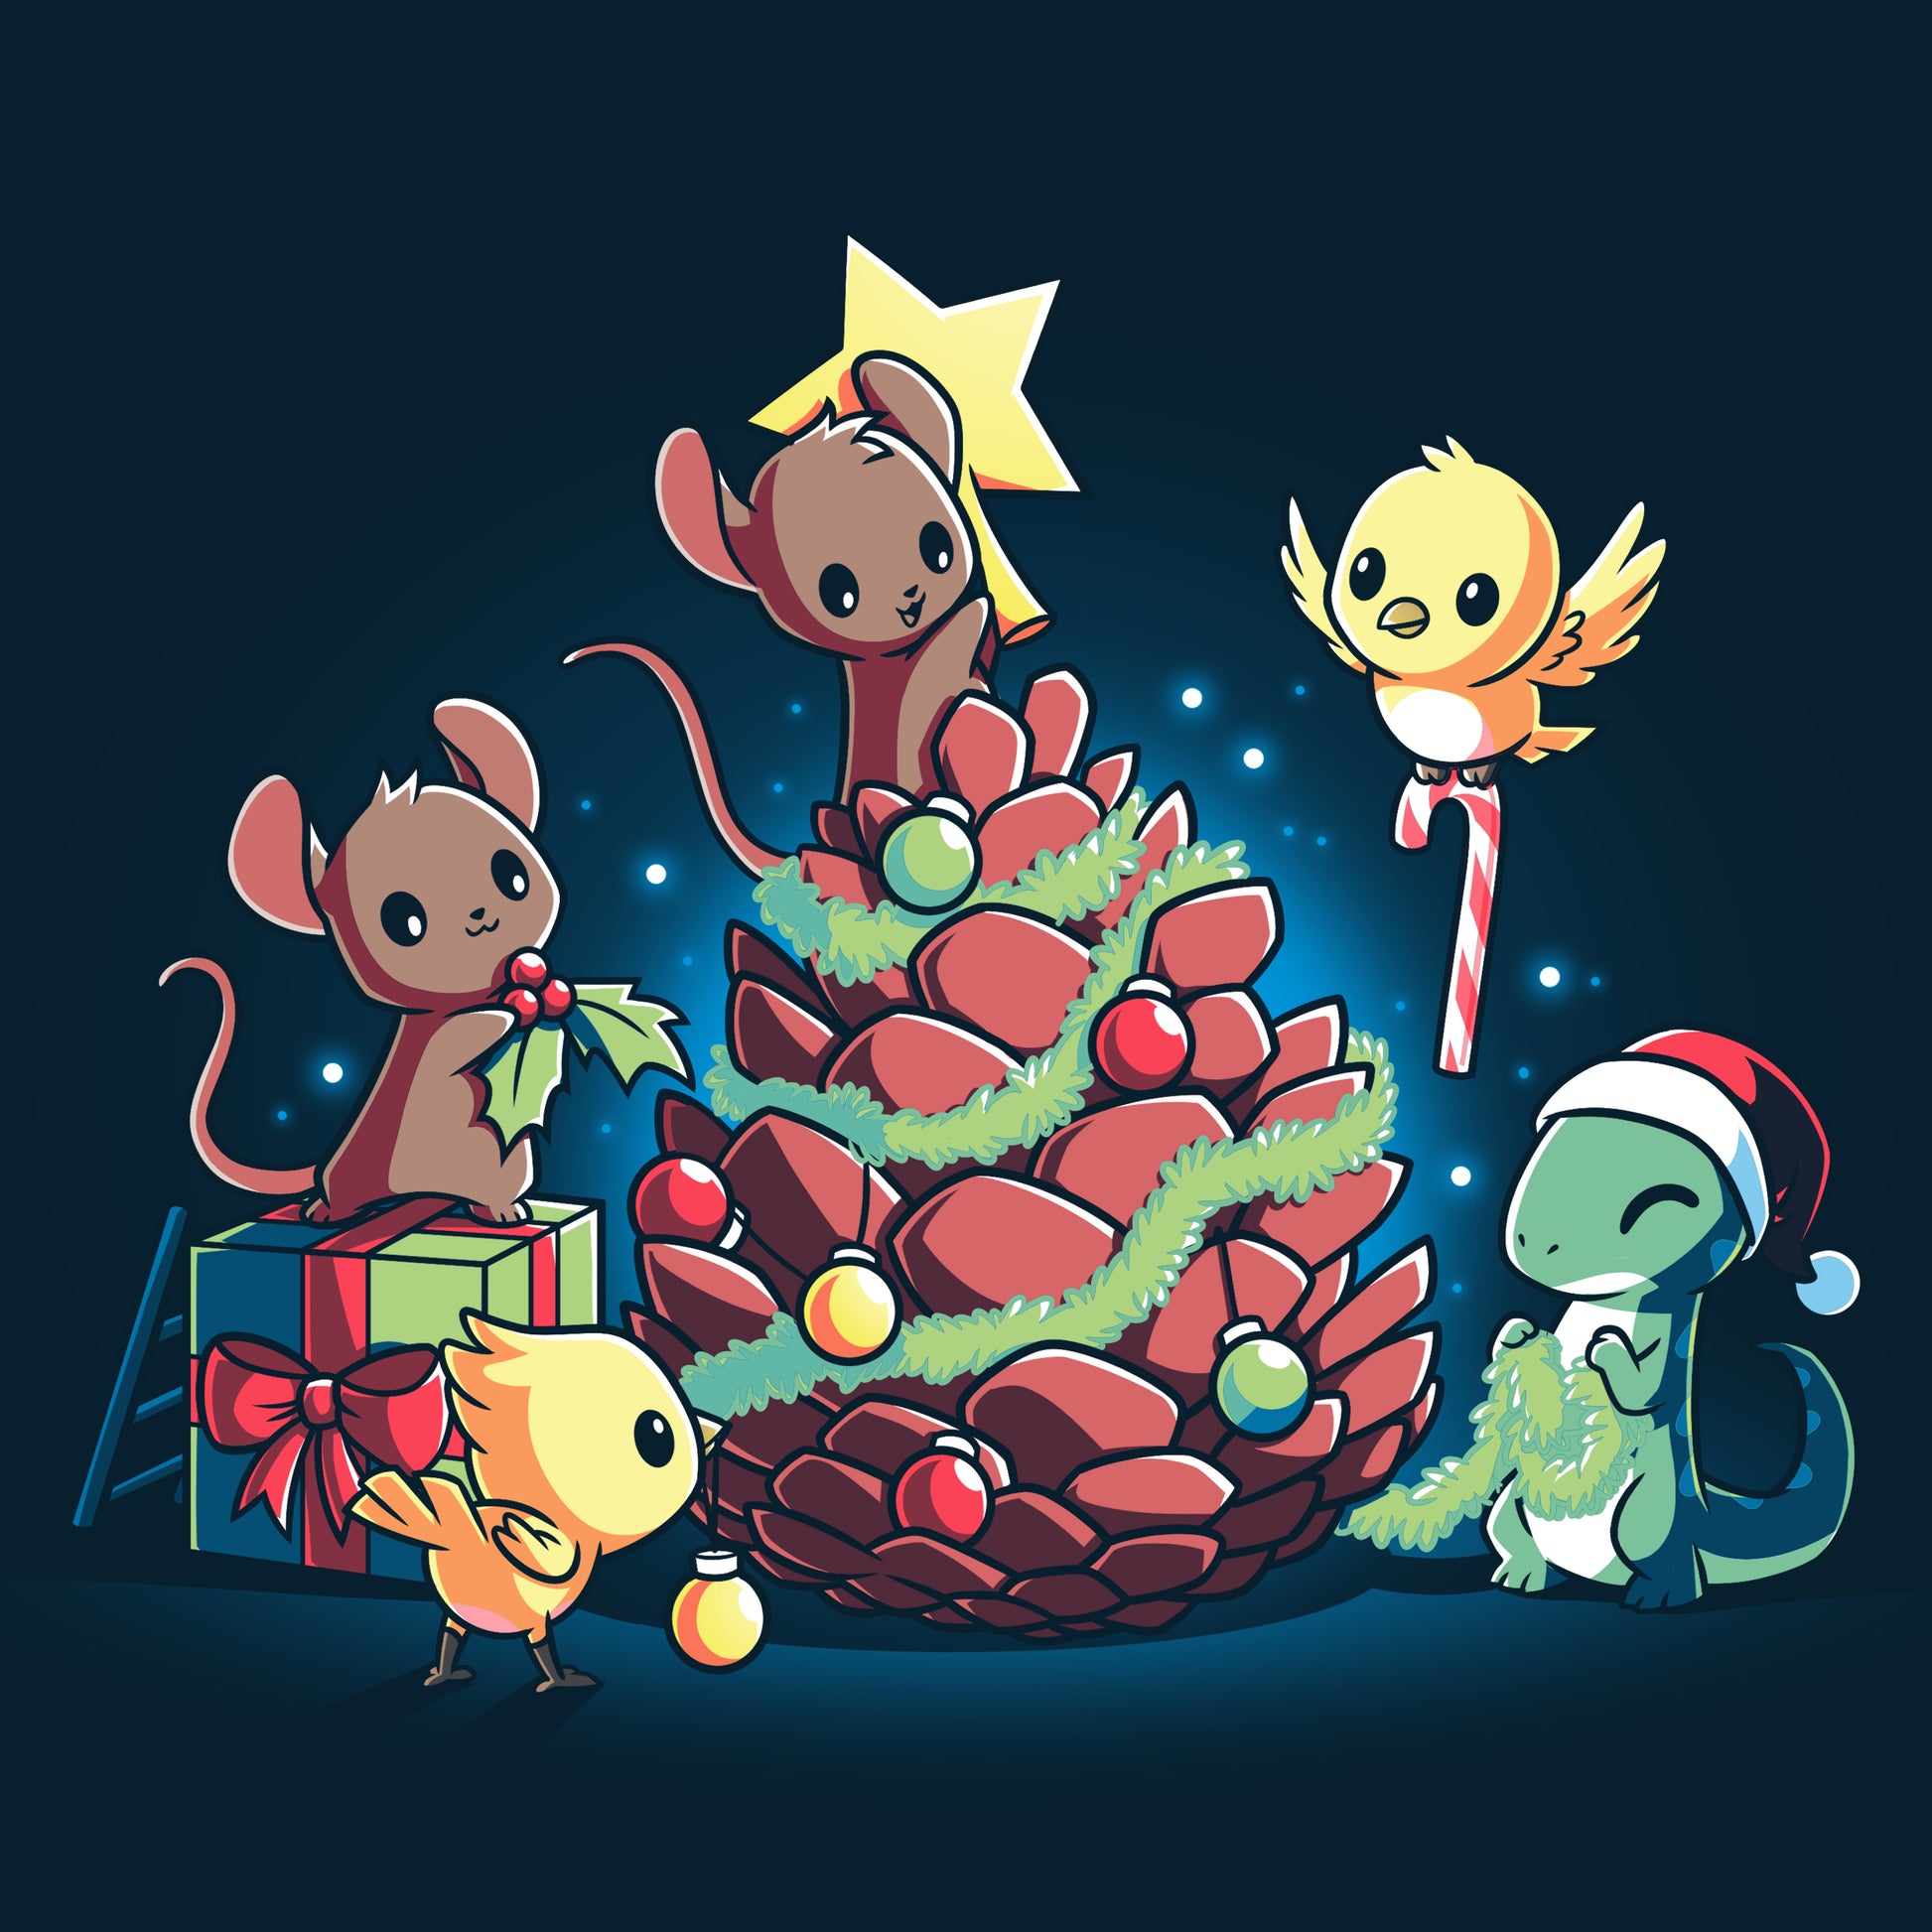 A fa la la-dorable Teddy Bear wearing a TeeTurtle sweater, surrounded by playful mice and standing next to a beautifully decorated Christmas tree showcasing the Little Critter's Christmas from TeeTurtle.